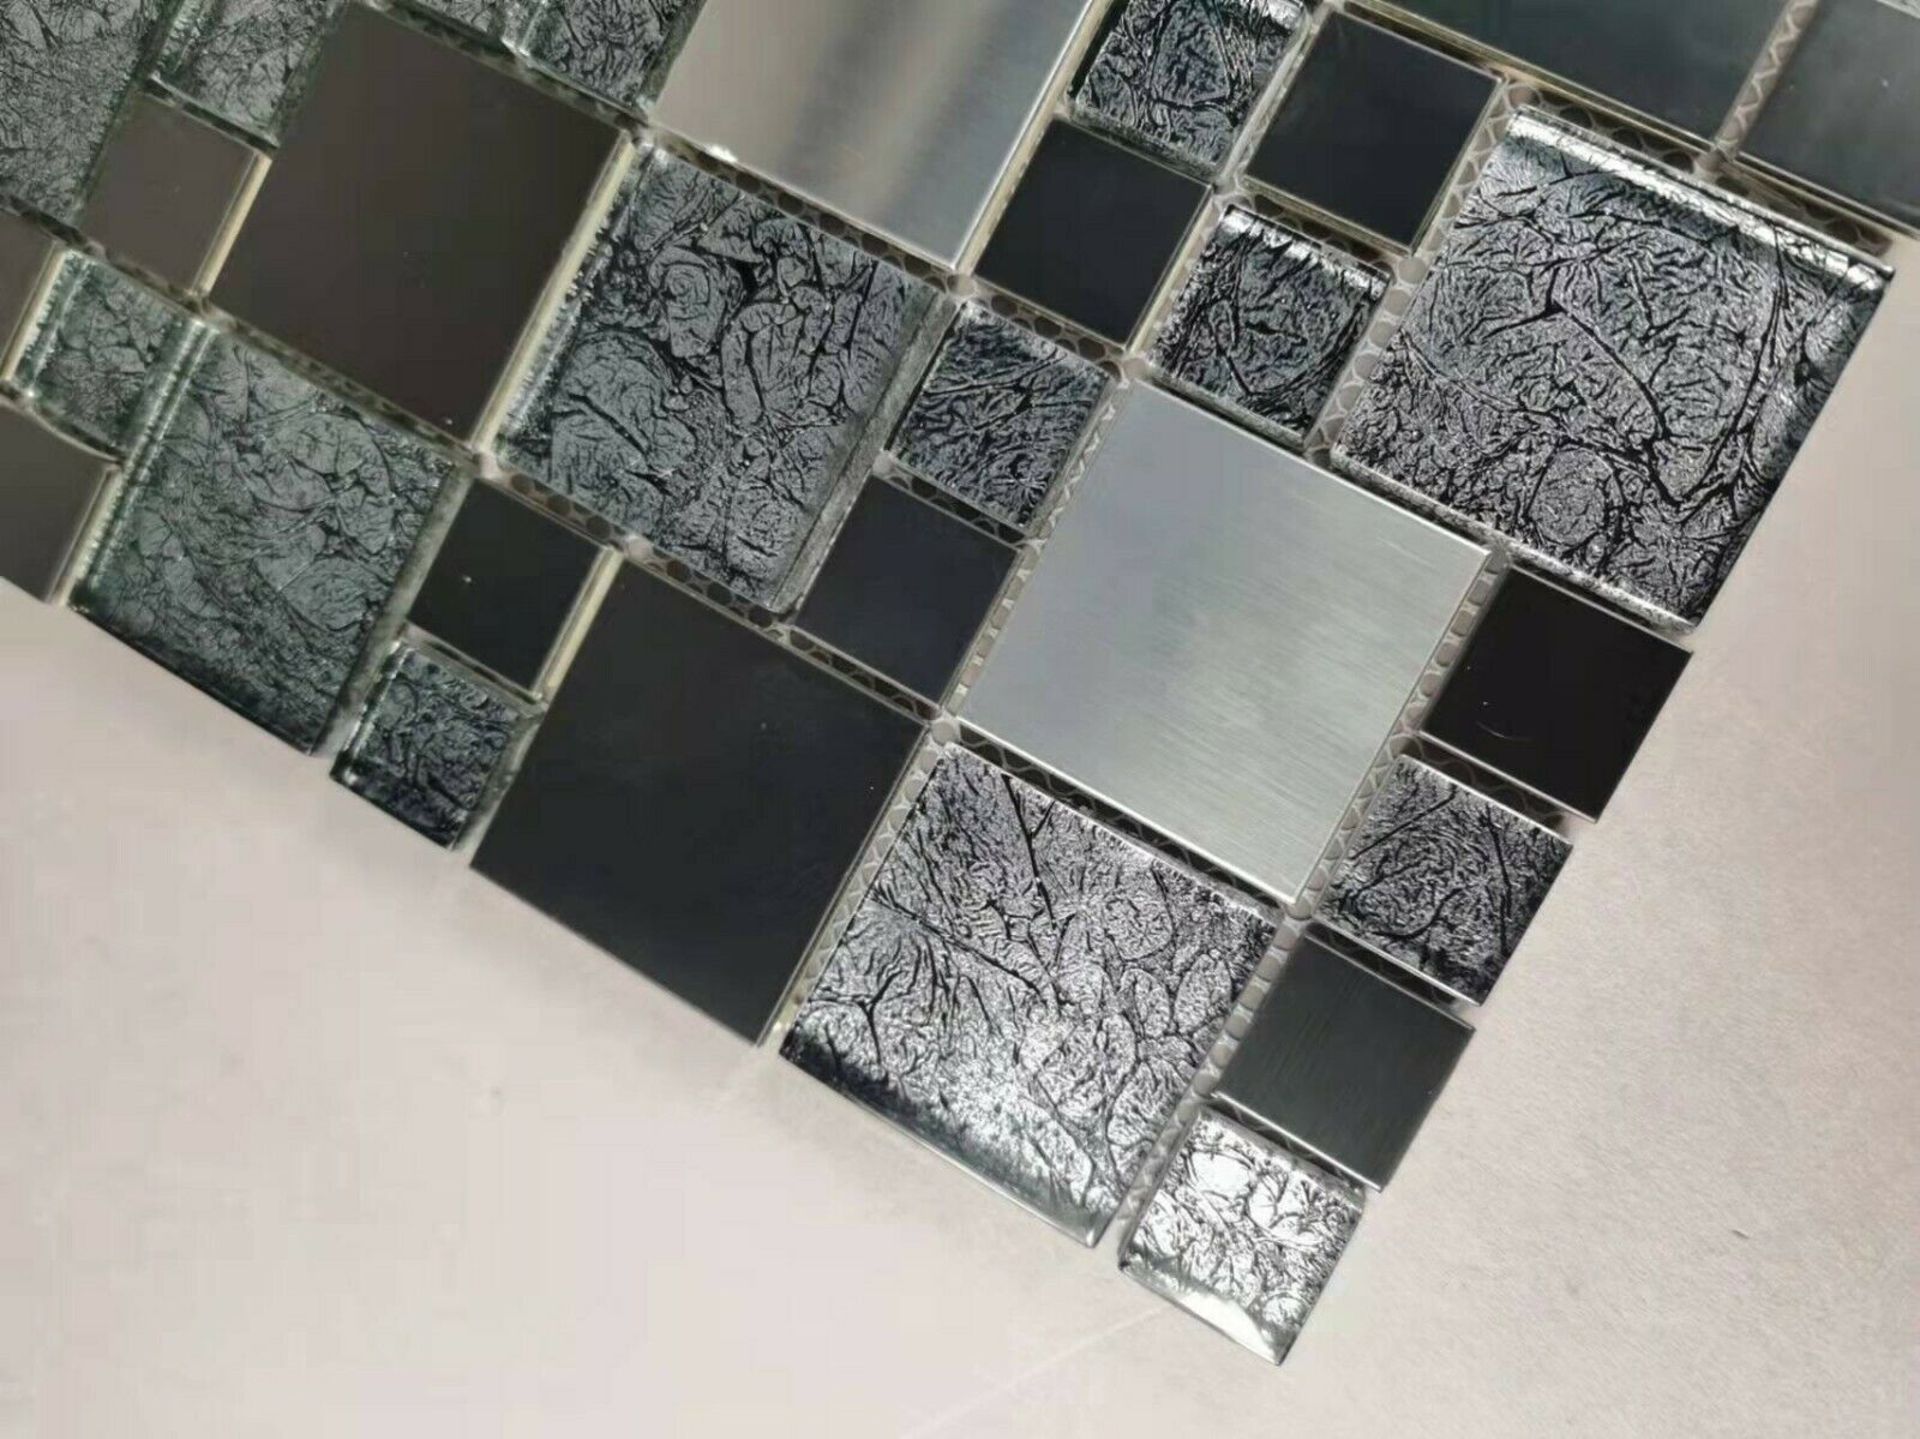 2 Square Metres - High Quality Glass/Stainless Steel Mosaic Tiles - Image 3 of 3